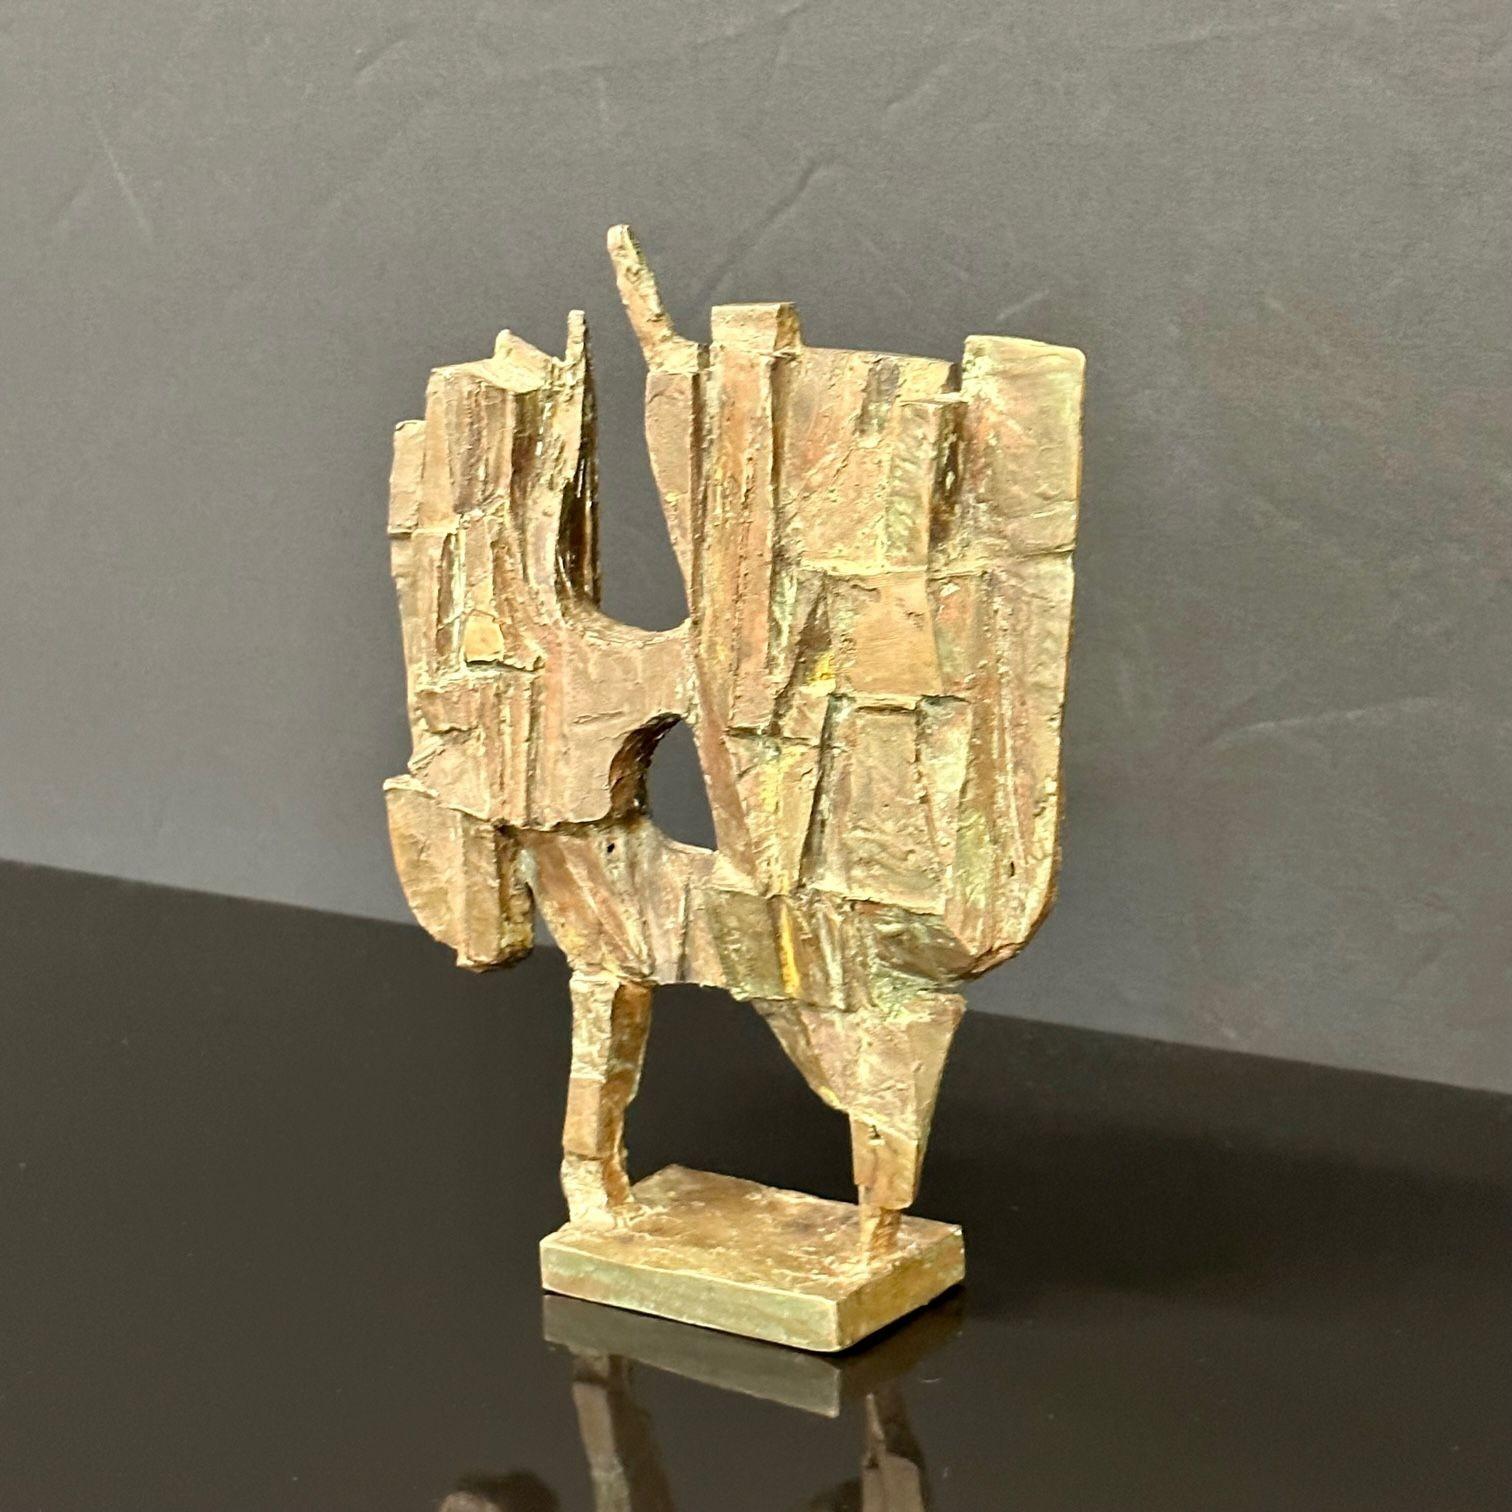 Mid-20th Century Midcentury Brutalist Abstract Sculpture, Patinated Bronze Decorative Art Object For Sale